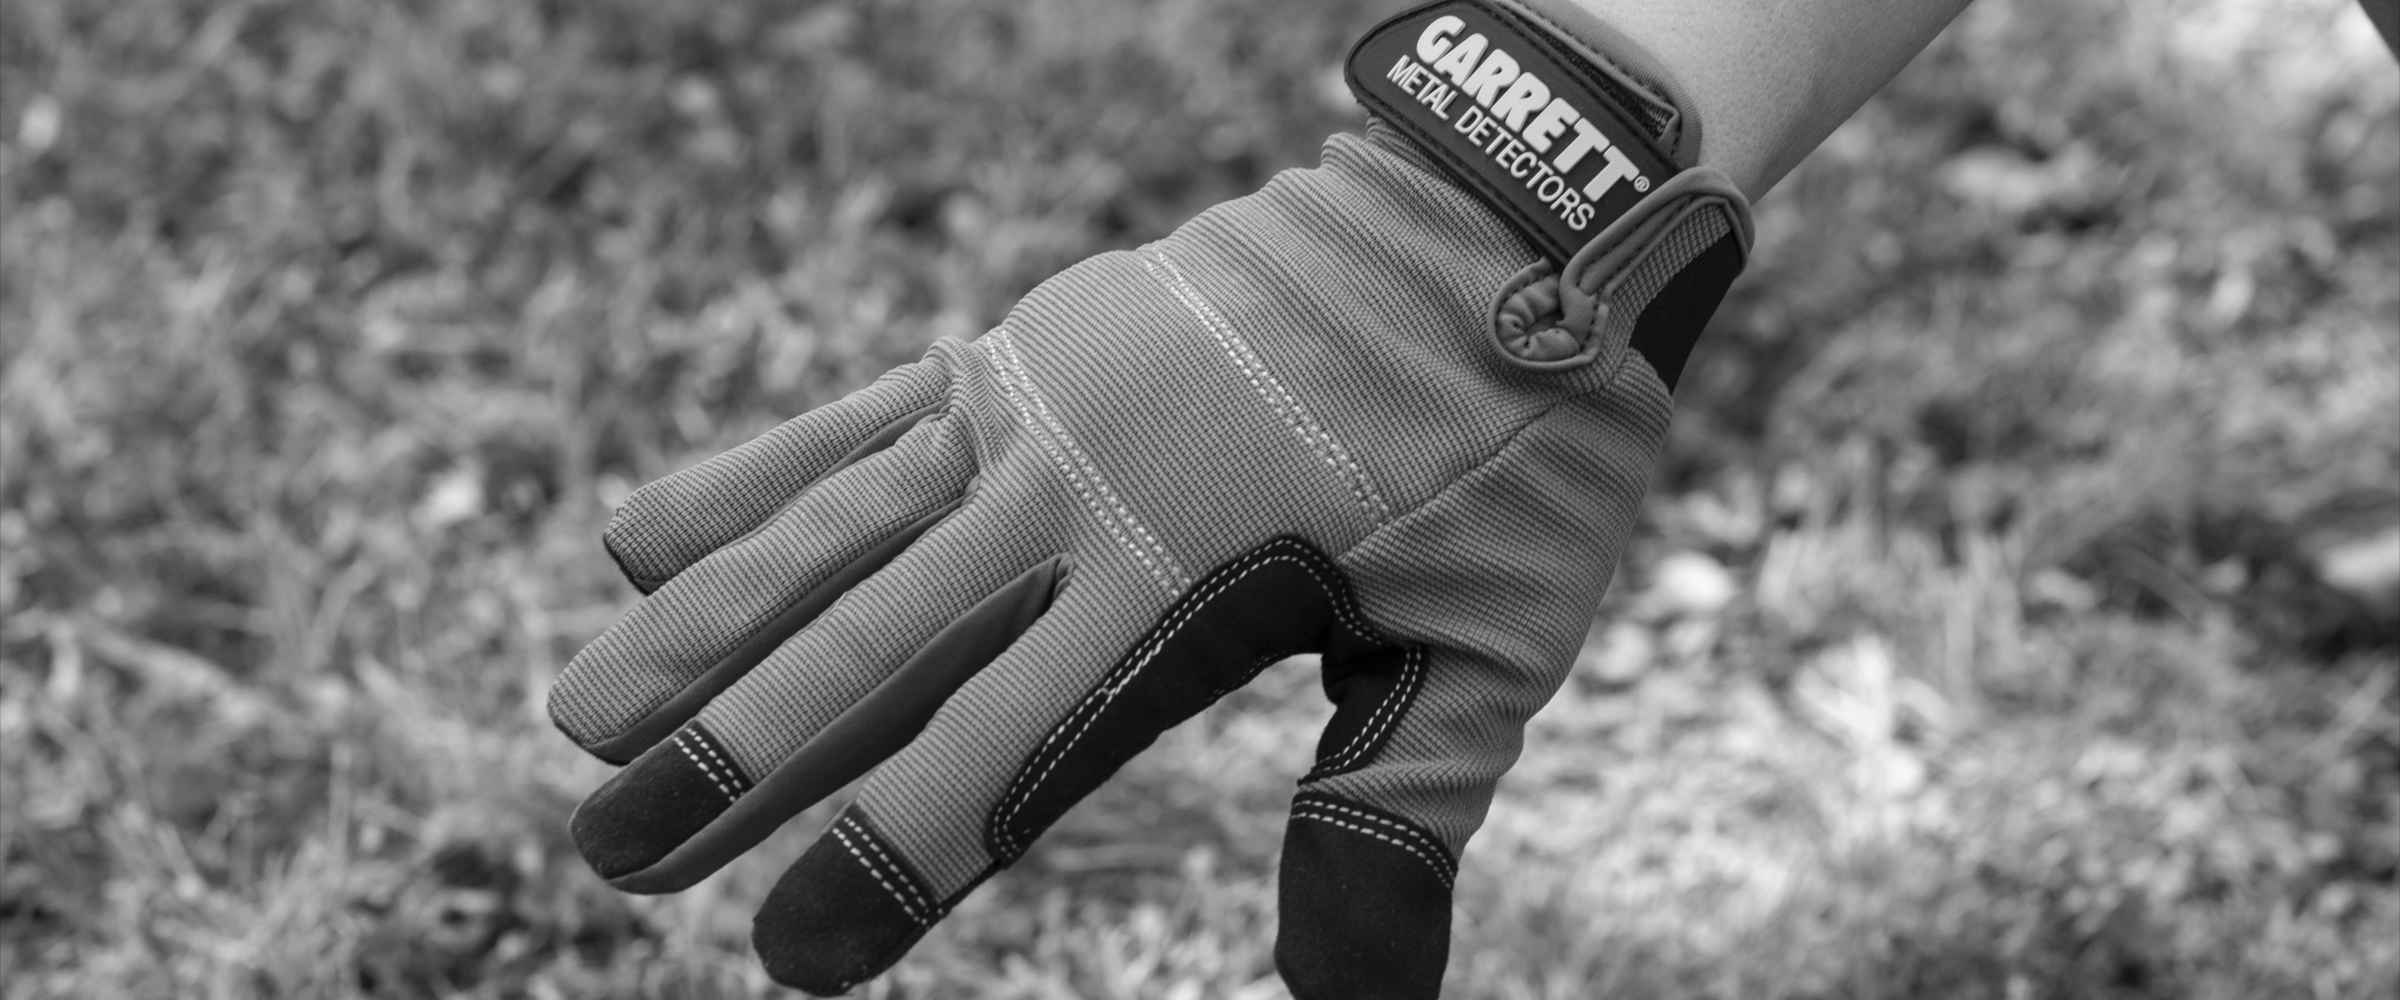 Searcher Detecting Gloves